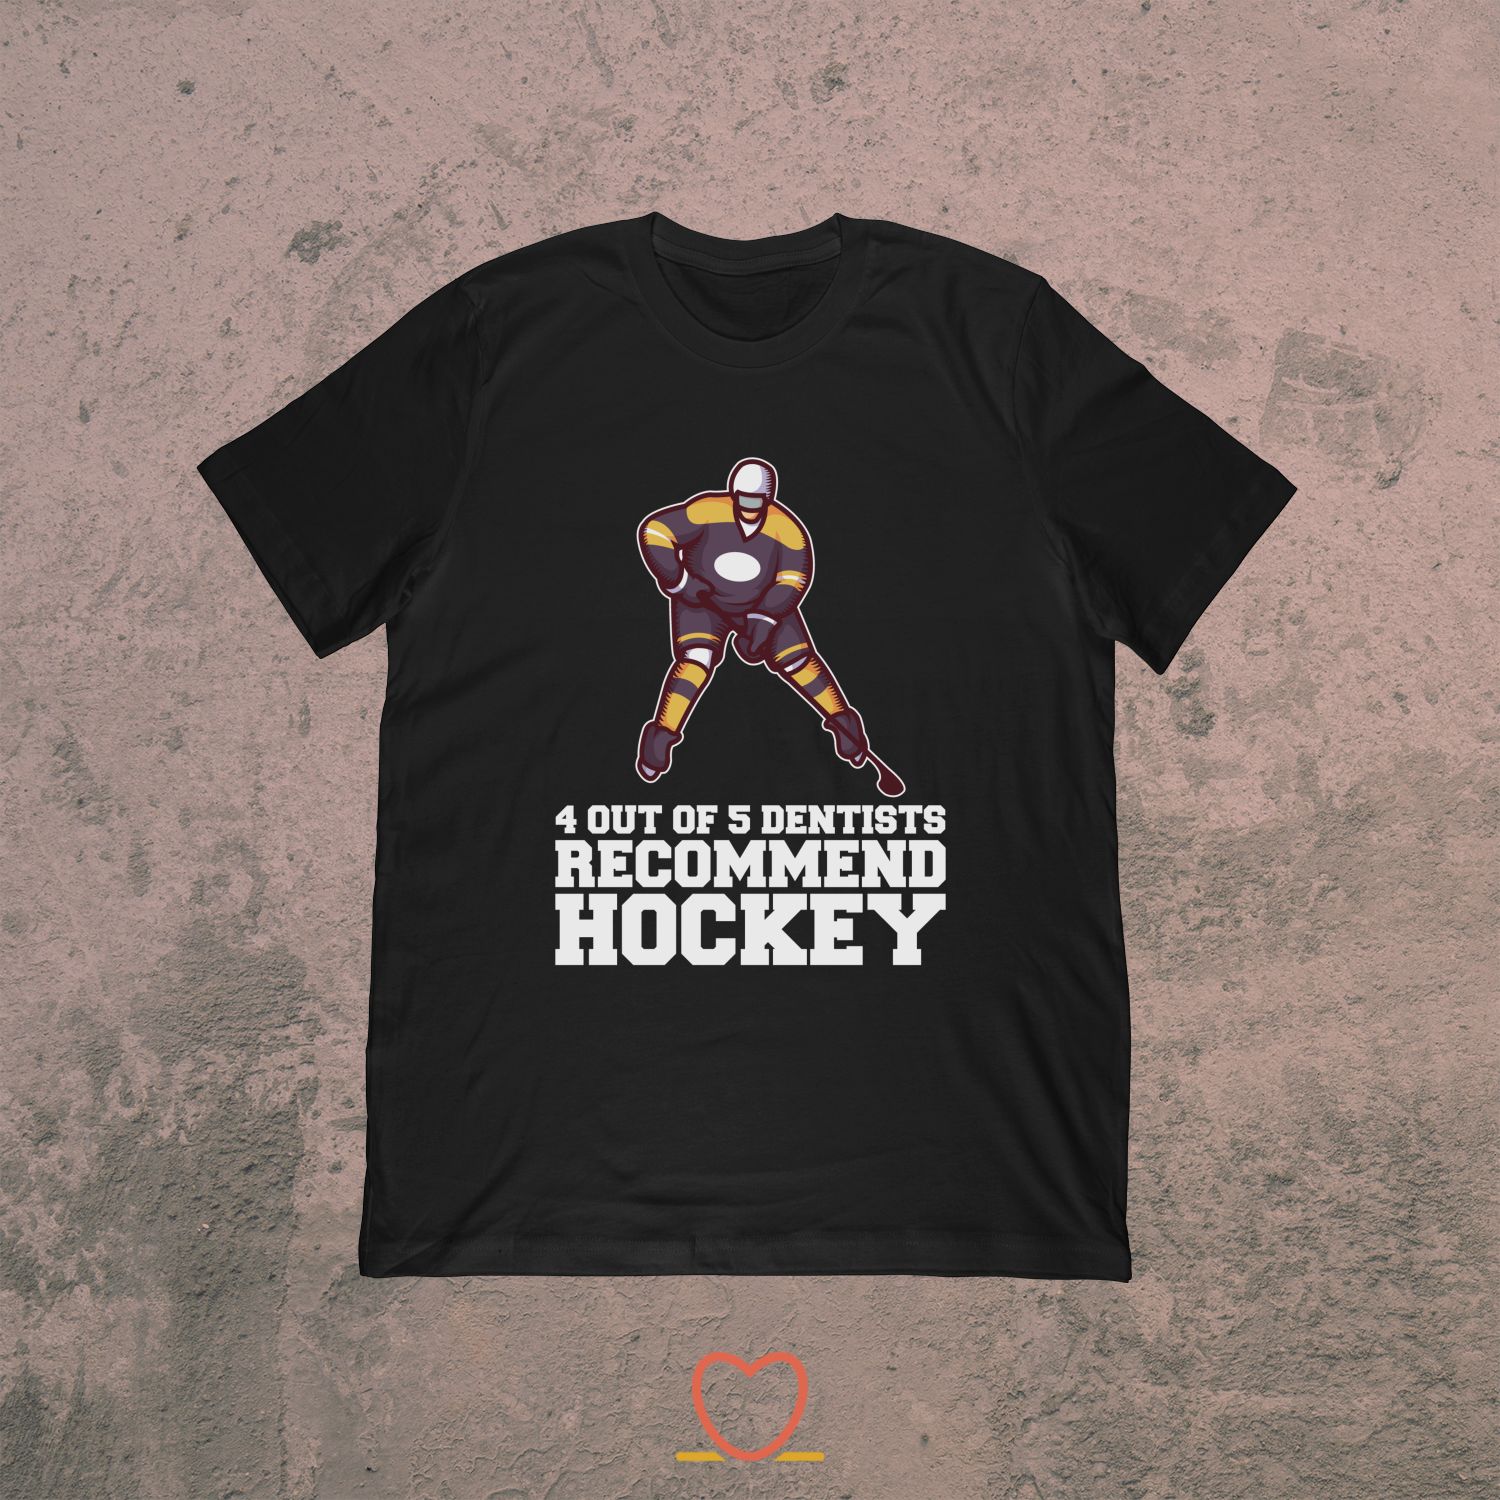 4 Out Of 5 Dentists Recommend Hockey – Funny Ice Hockey Tee